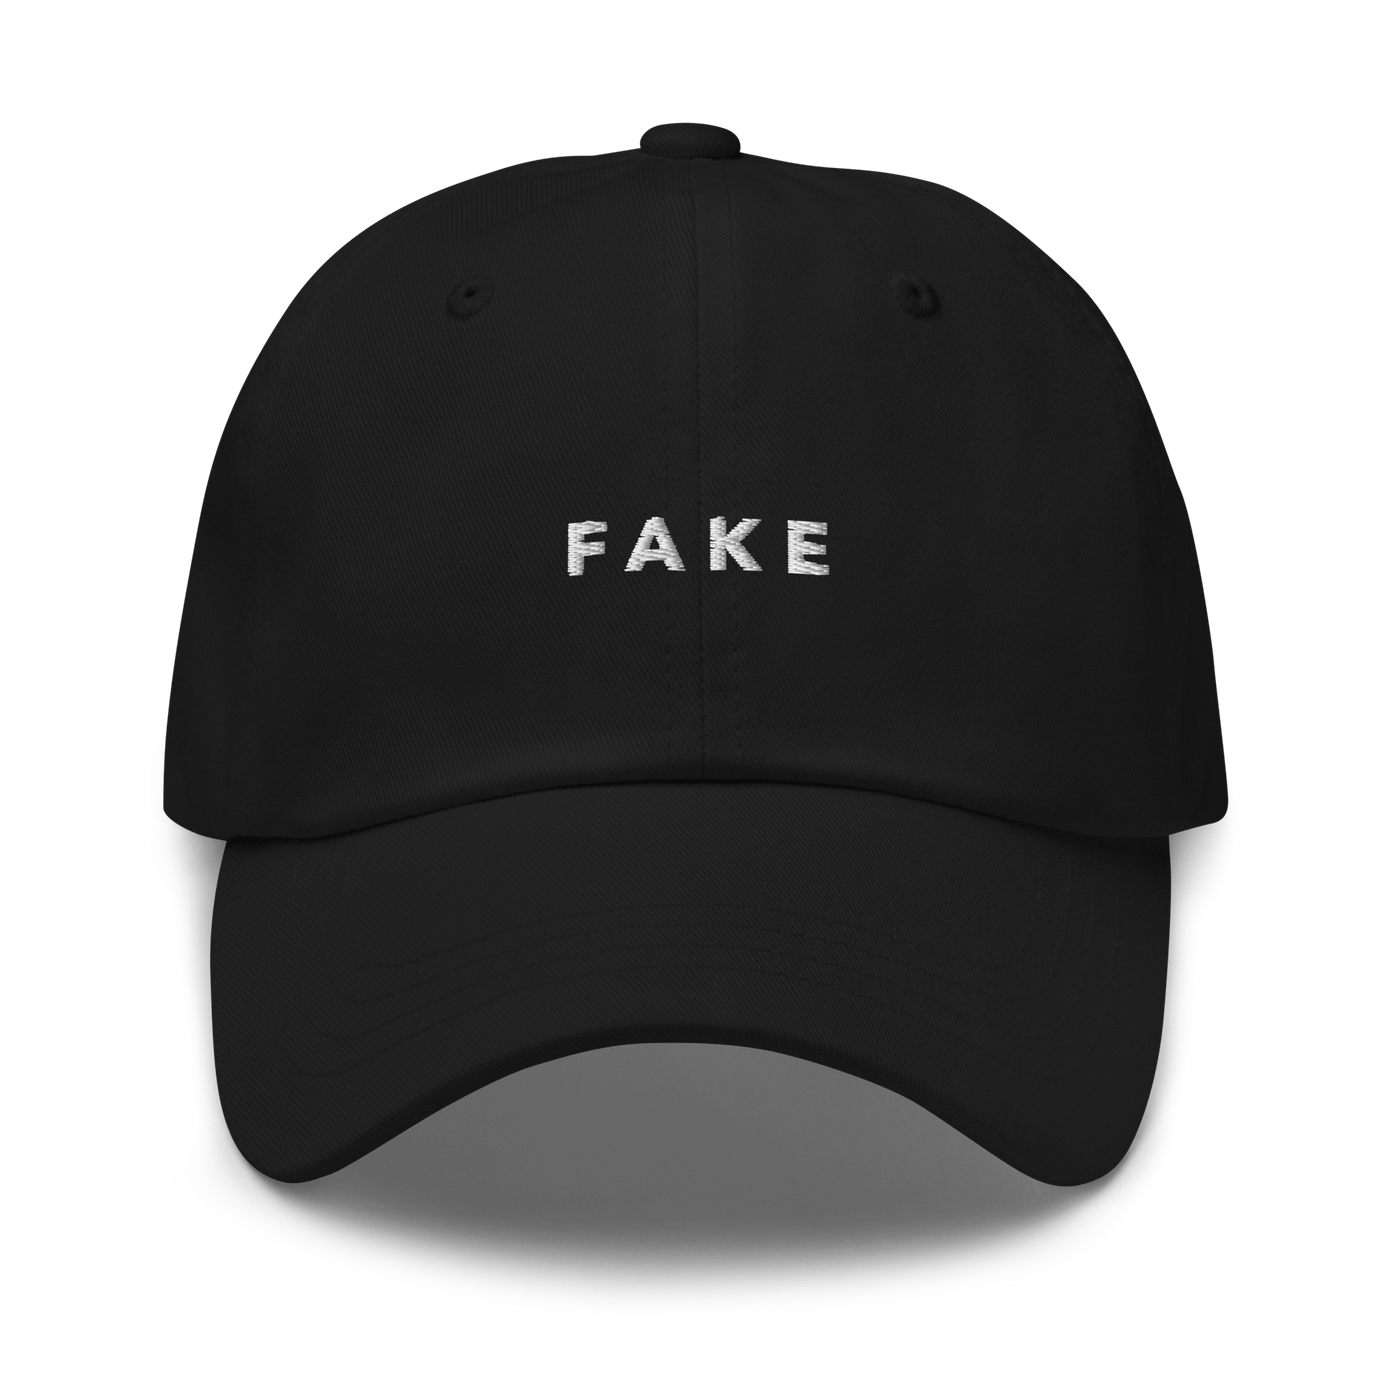 FAKE Dad hat - Black - - Just Another Cap Store